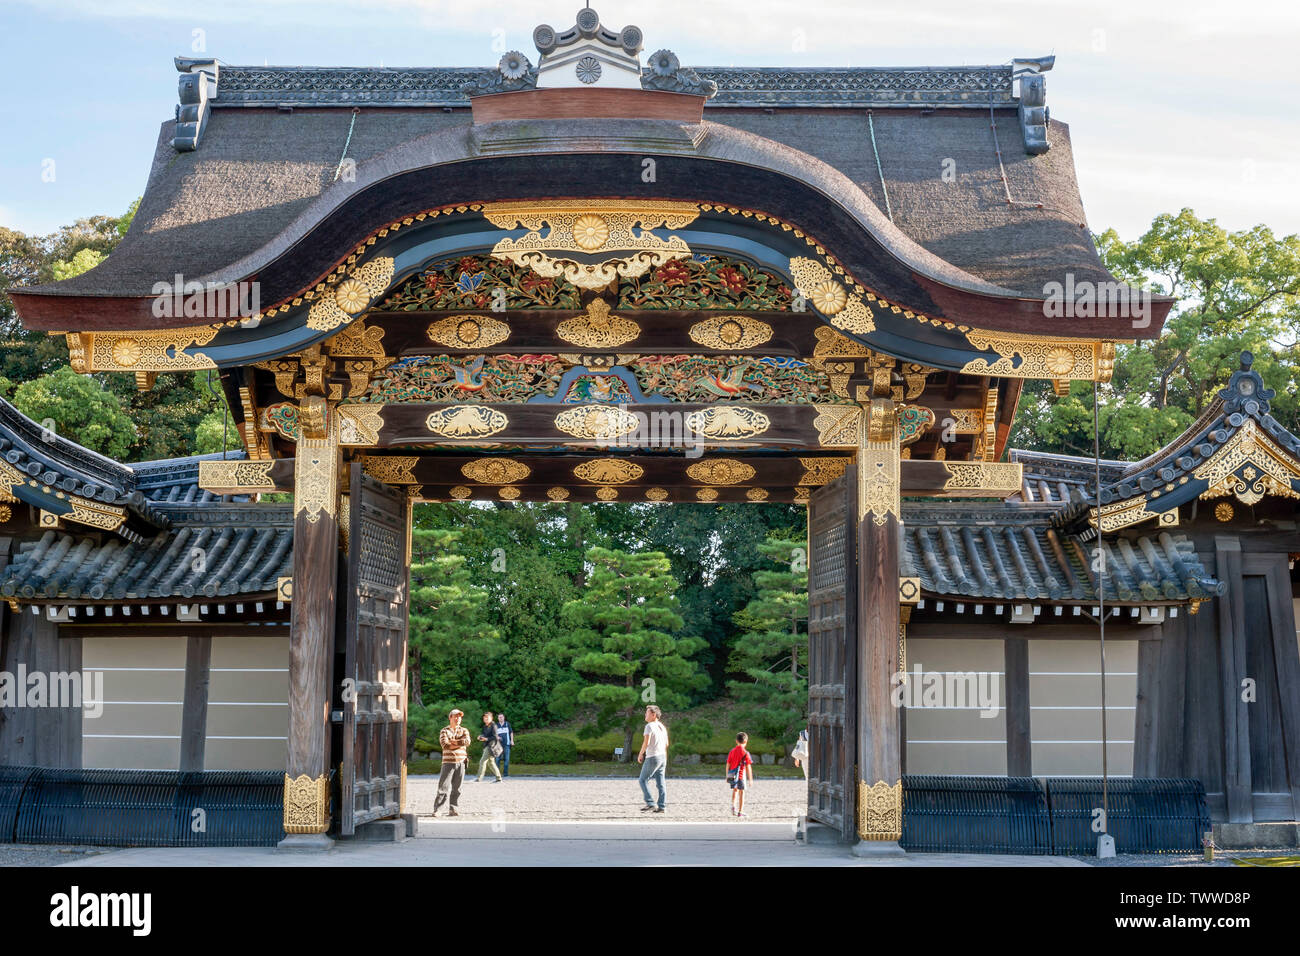 The Karamon main gate to the  Ninomaru Palace grounds, part of the  Nijo castle complex, with visitors strolling within,  Kyoto, Japan Stock Photo